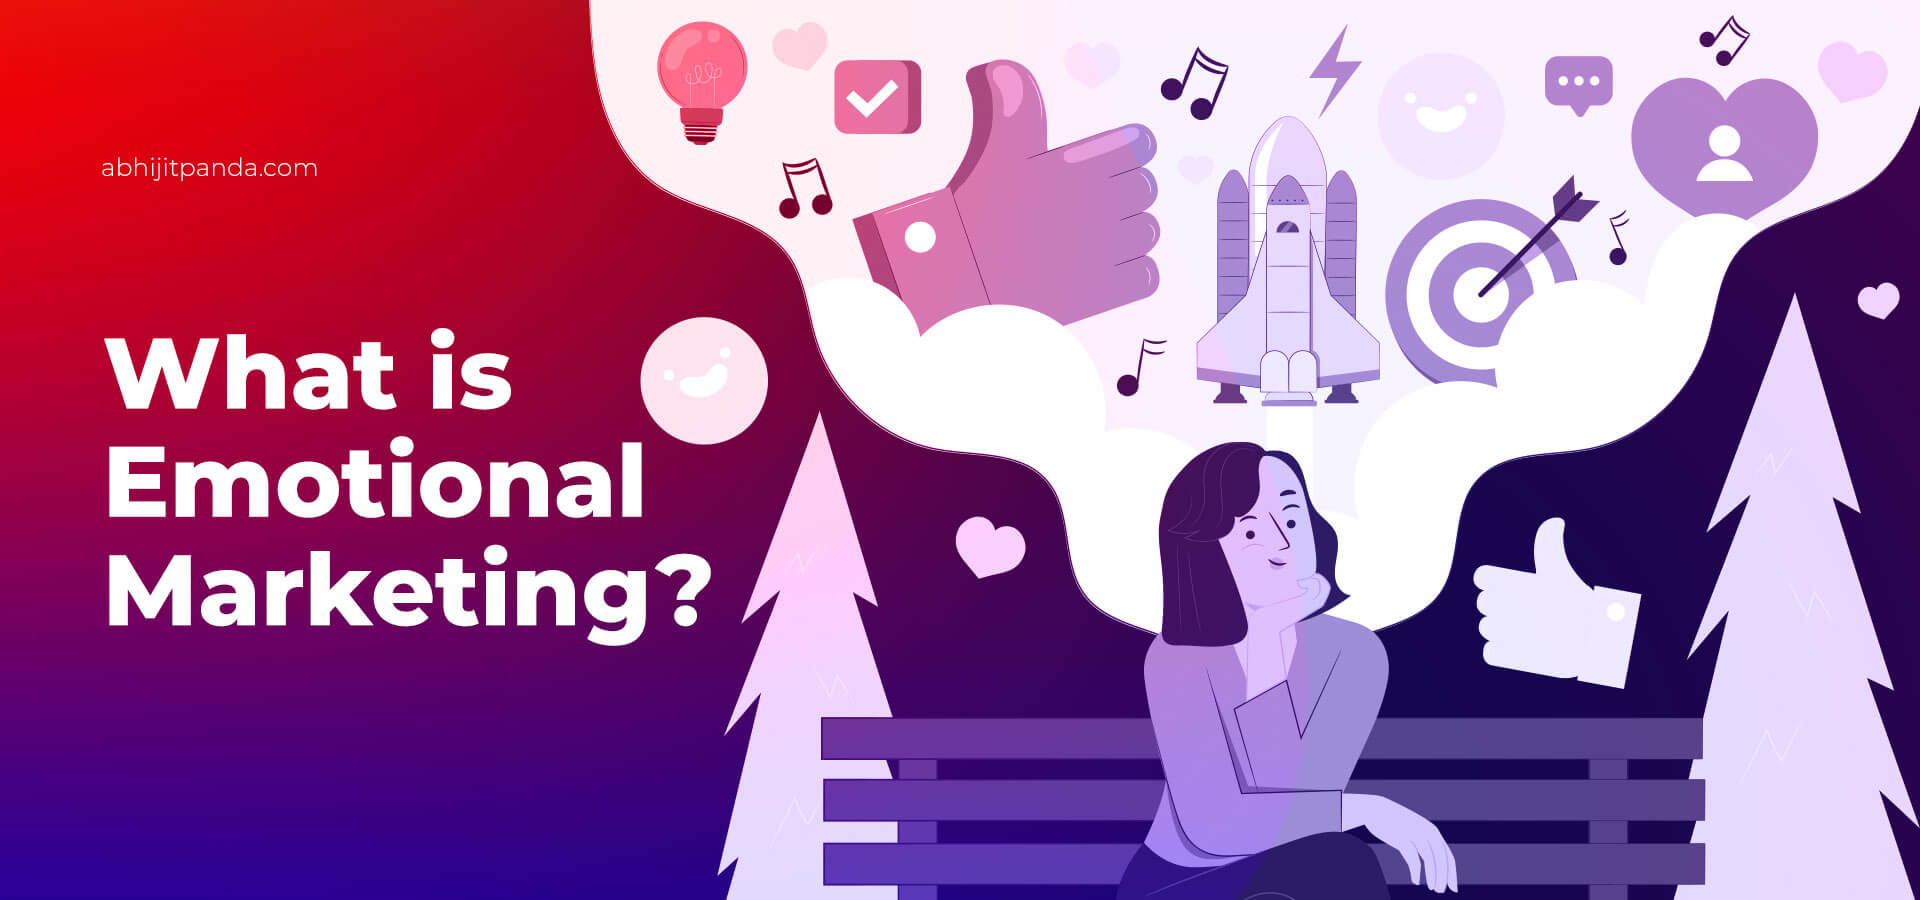 What is Emotional Marketing?